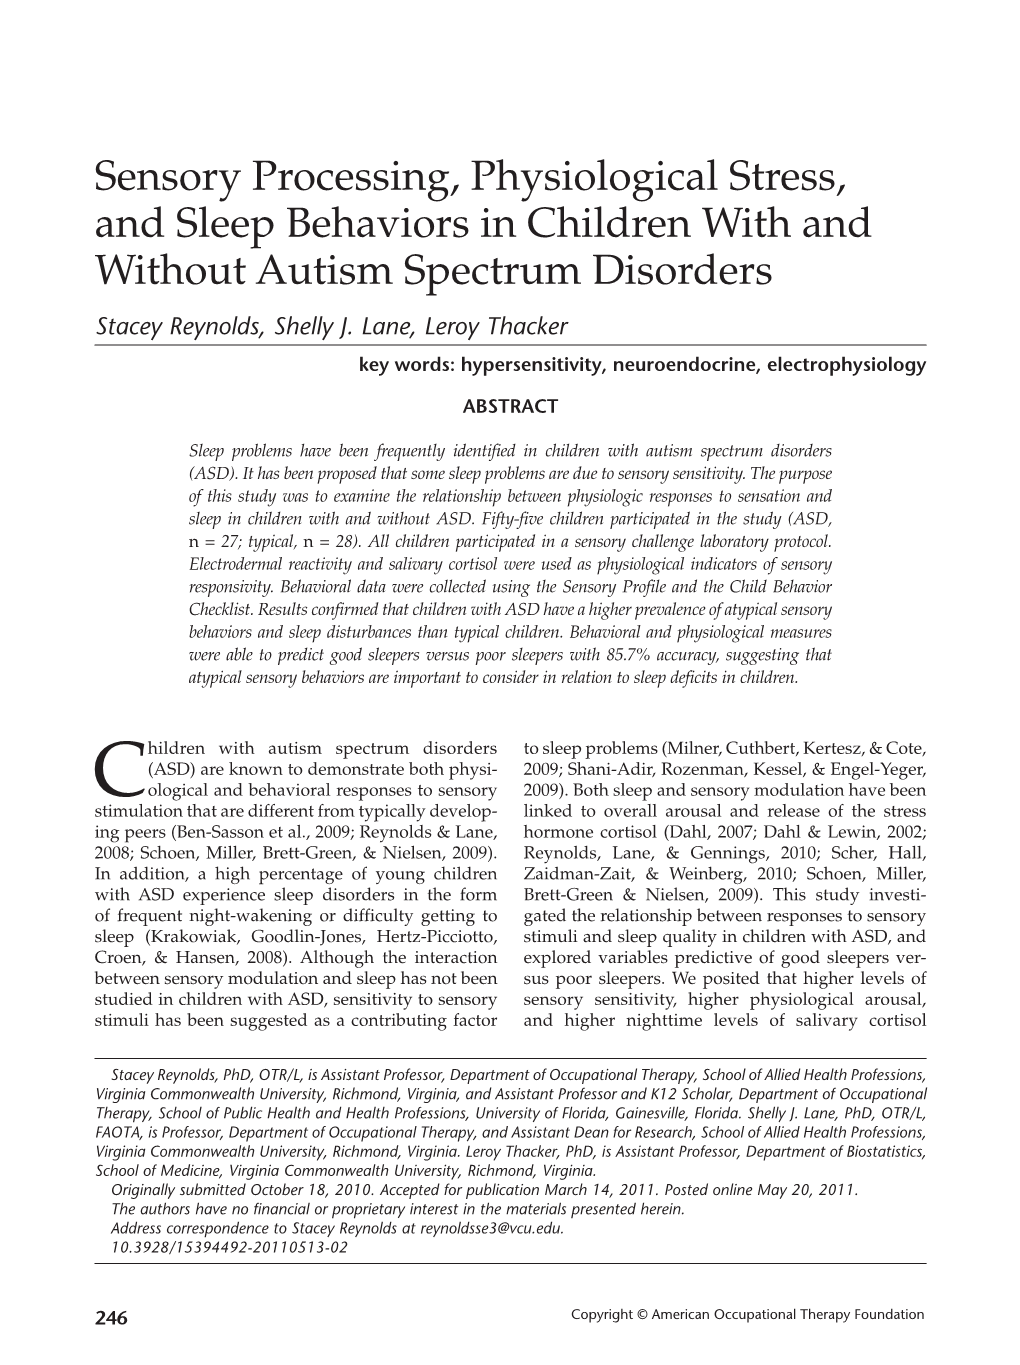 Sensory Processing, Physiological Stress, and Sleep Behaviors in Children with and Without Autism Spectrum Disorders Stacey Reynolds, Shelly J